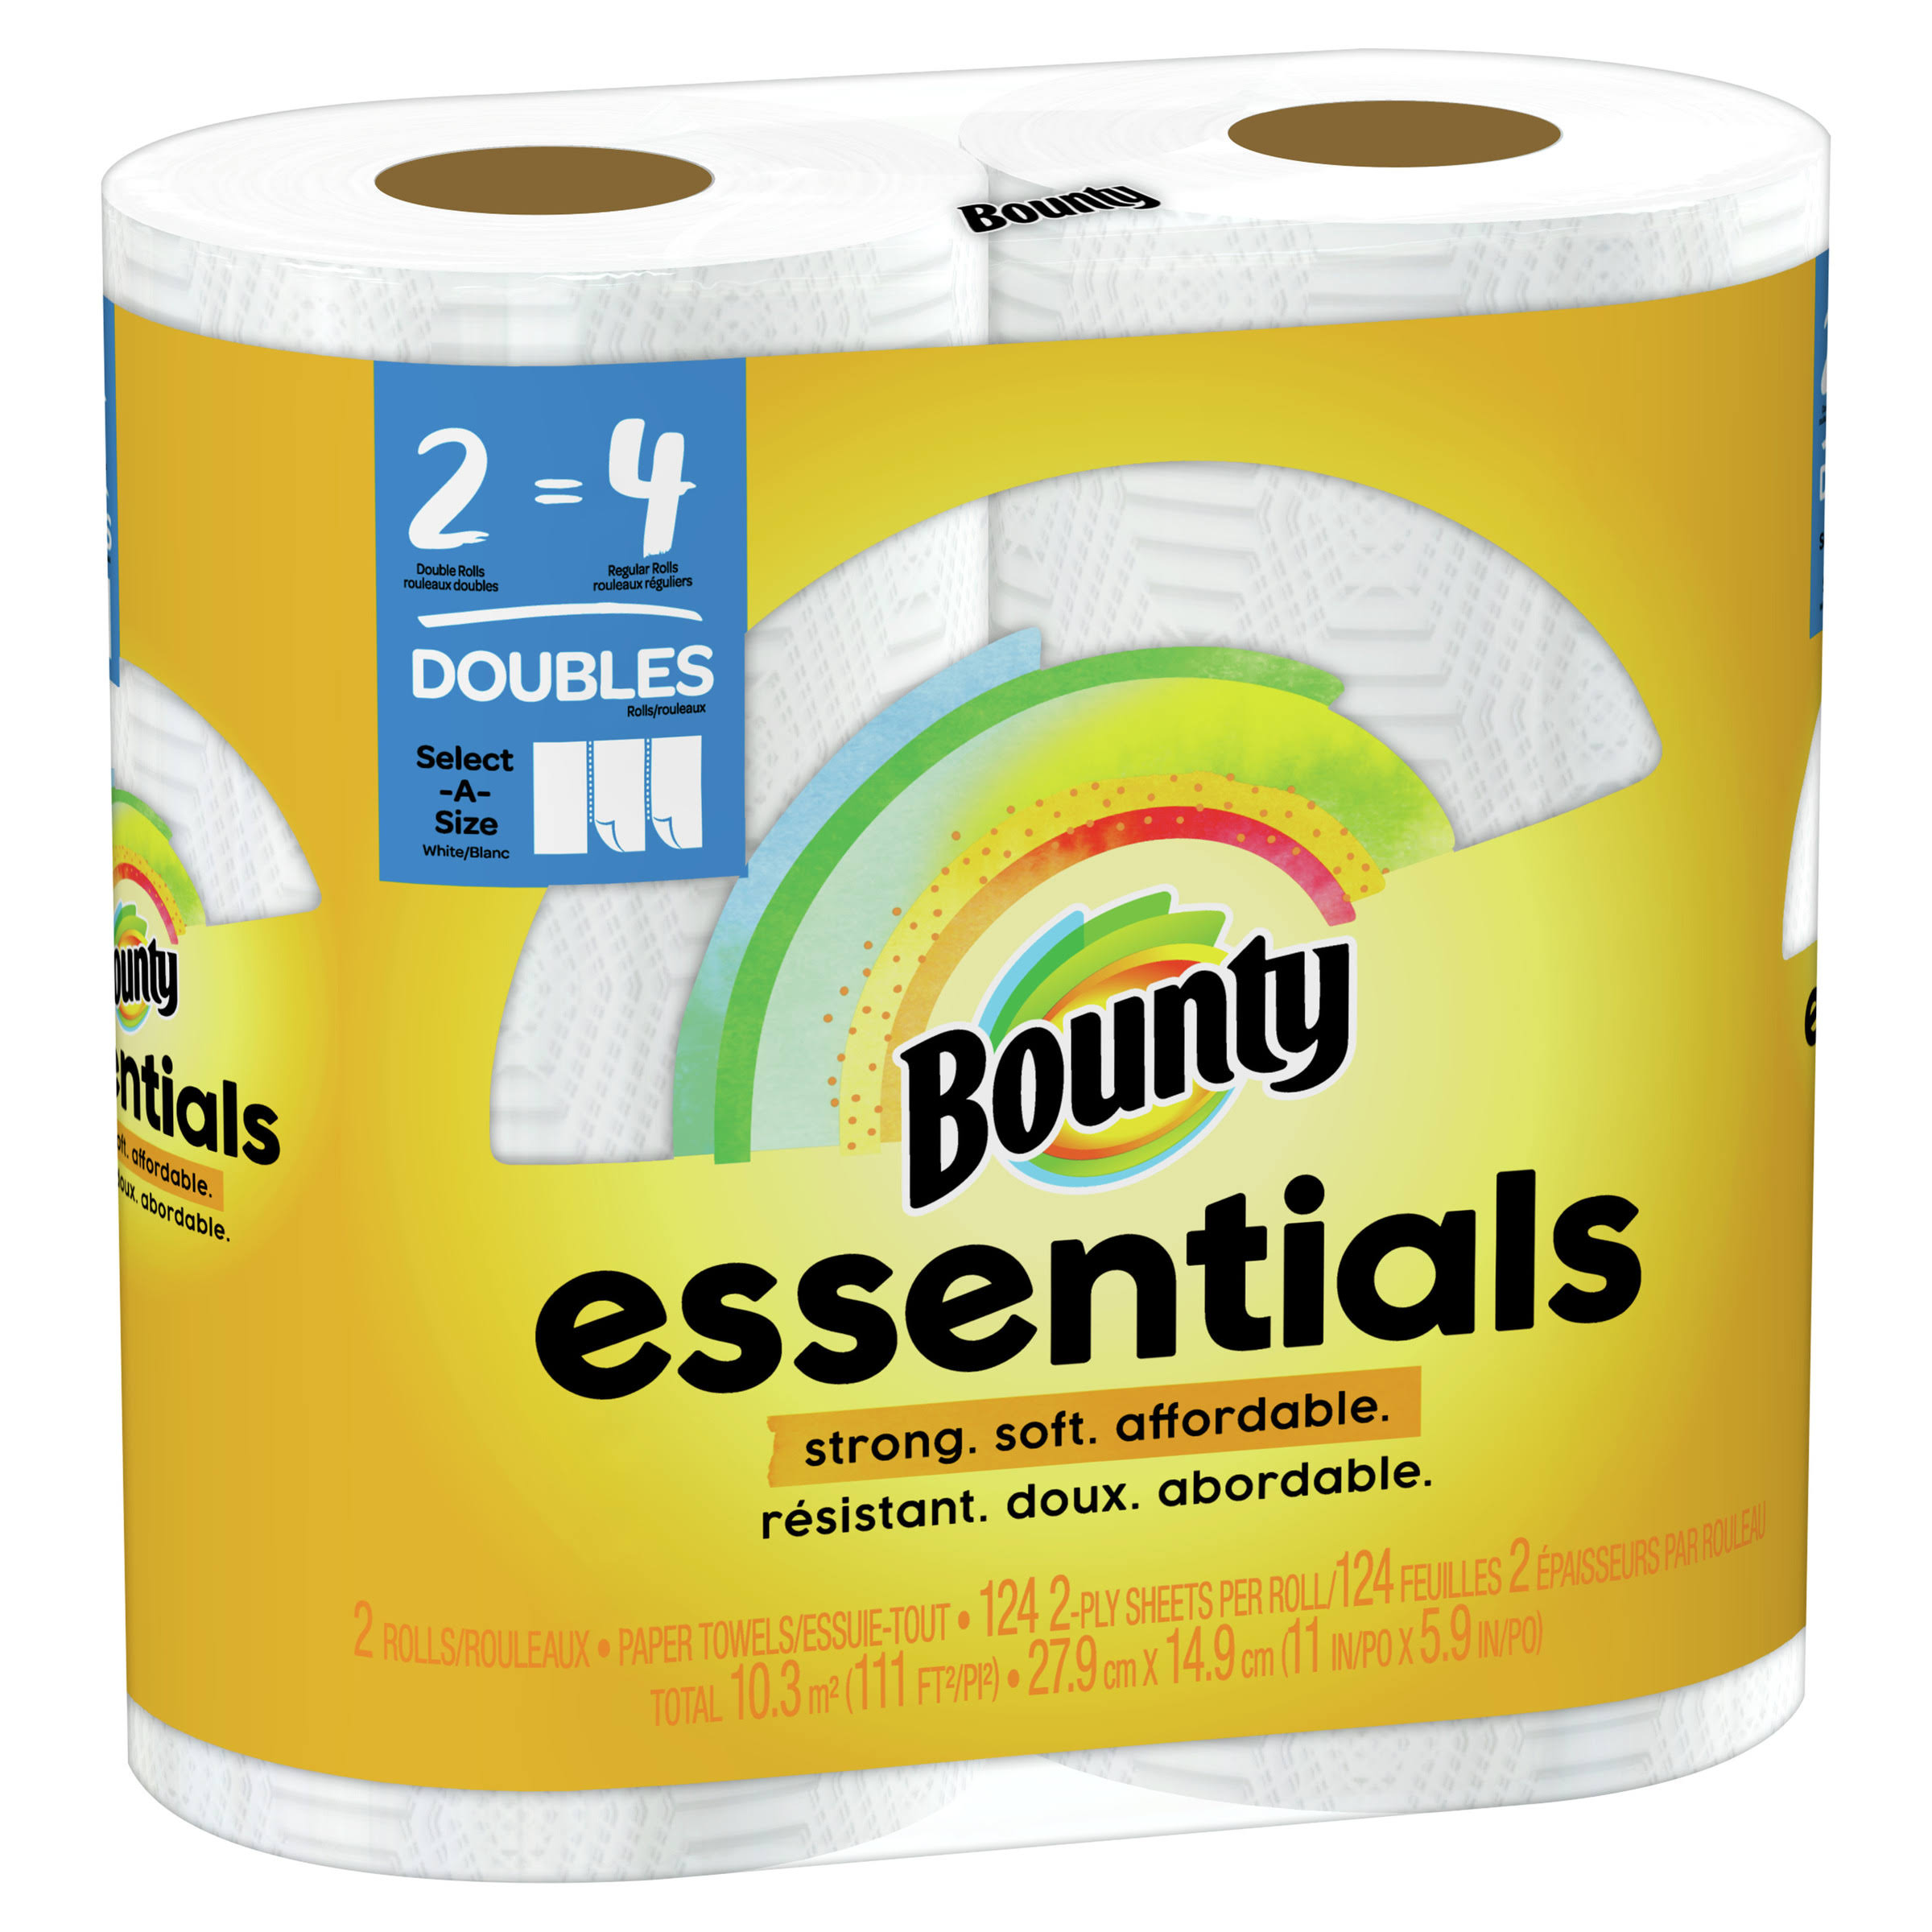 Bounty Essentials Select-A-Size Paper Towels, White, 2 Double Rolls = 4 Regular